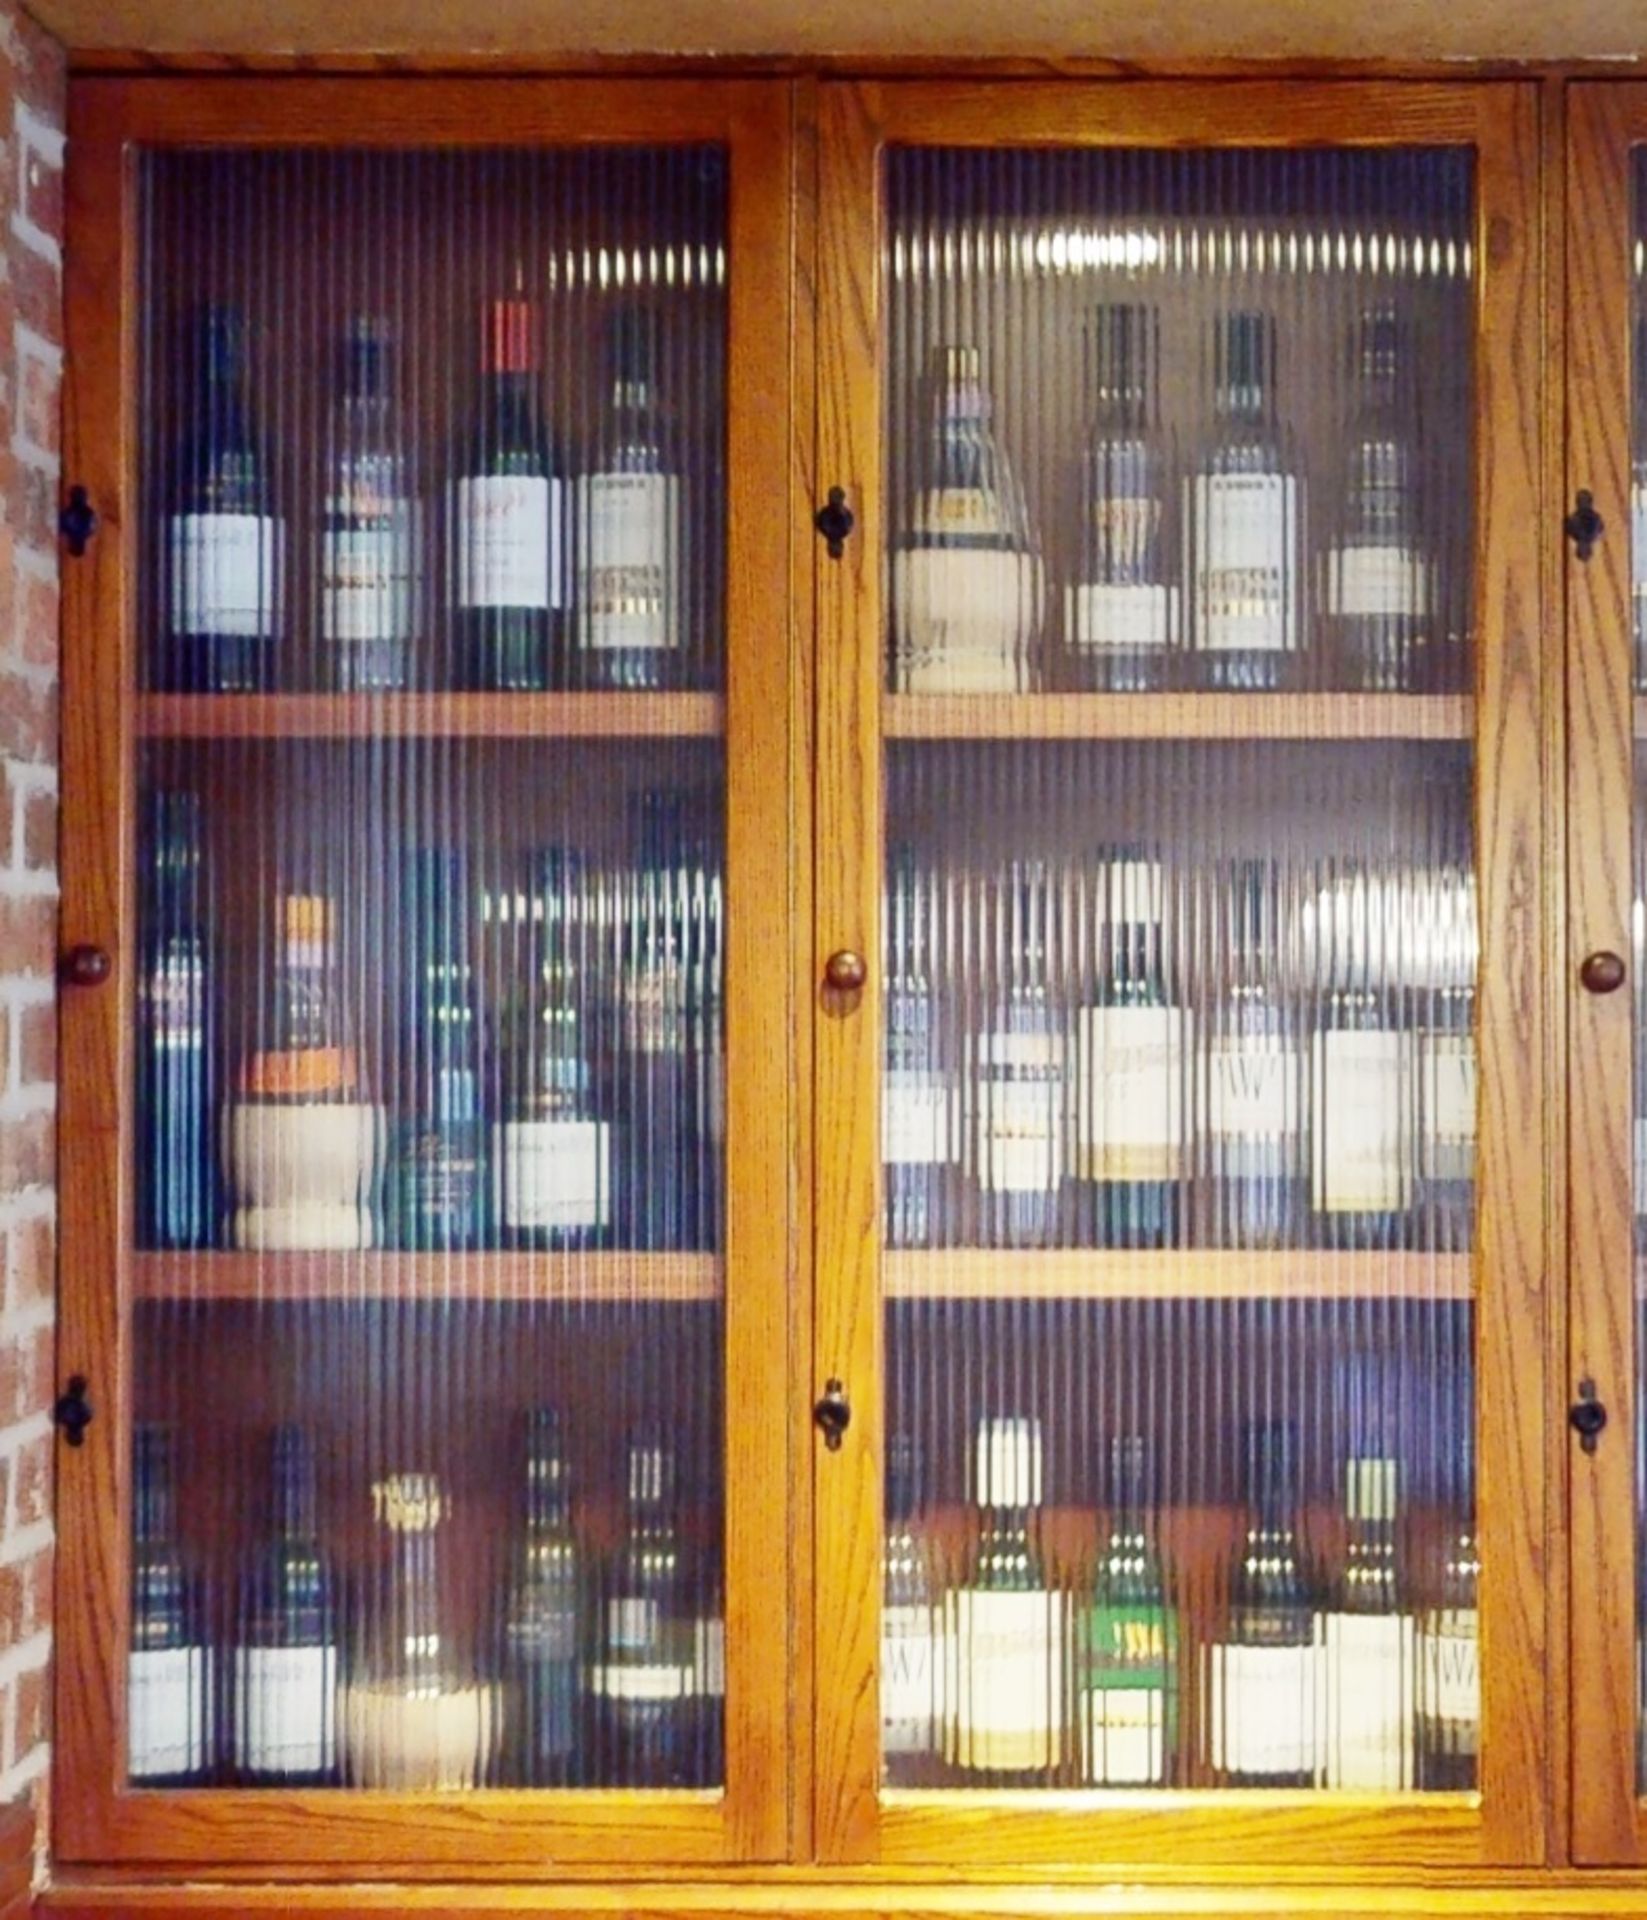 1 x Illuminated Wine Bottle Display Cabinet With Ribbed Glass Doors - Wooden Carcass With Five Doors - Image 3 of 3